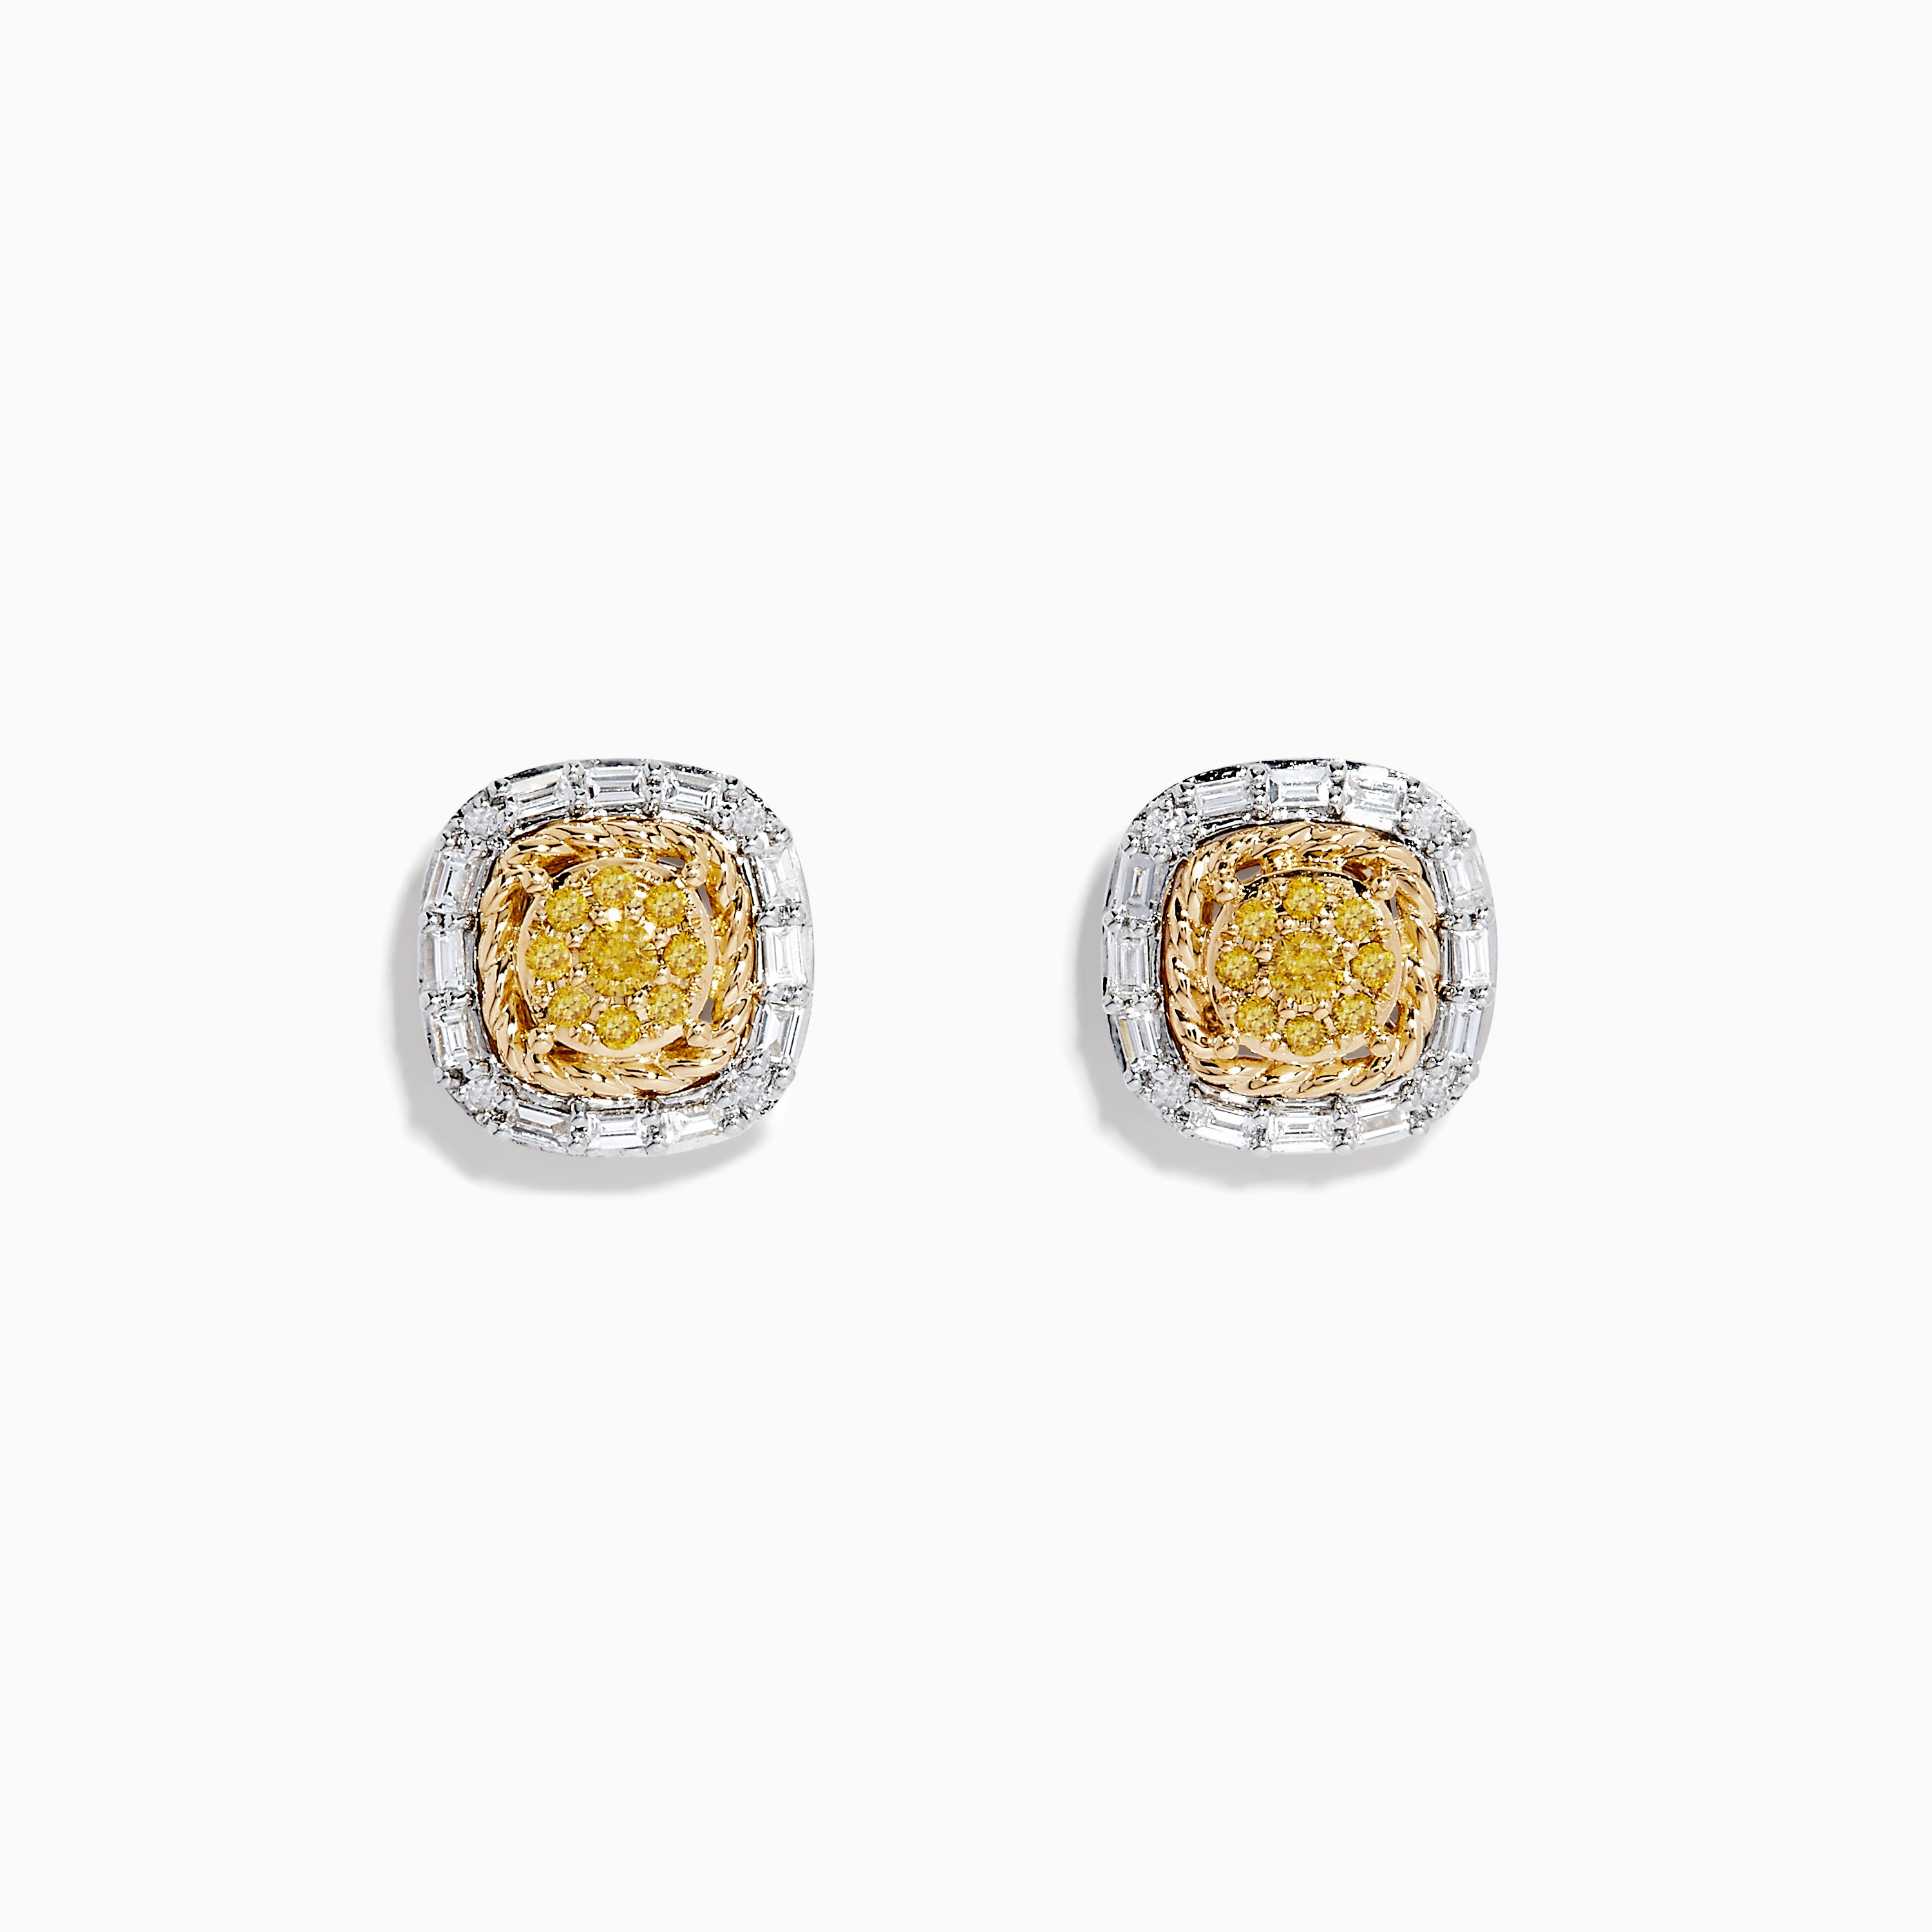 Effy Canare 14K Two-Tone Gold Yellow and White Diamond Stud Earrings